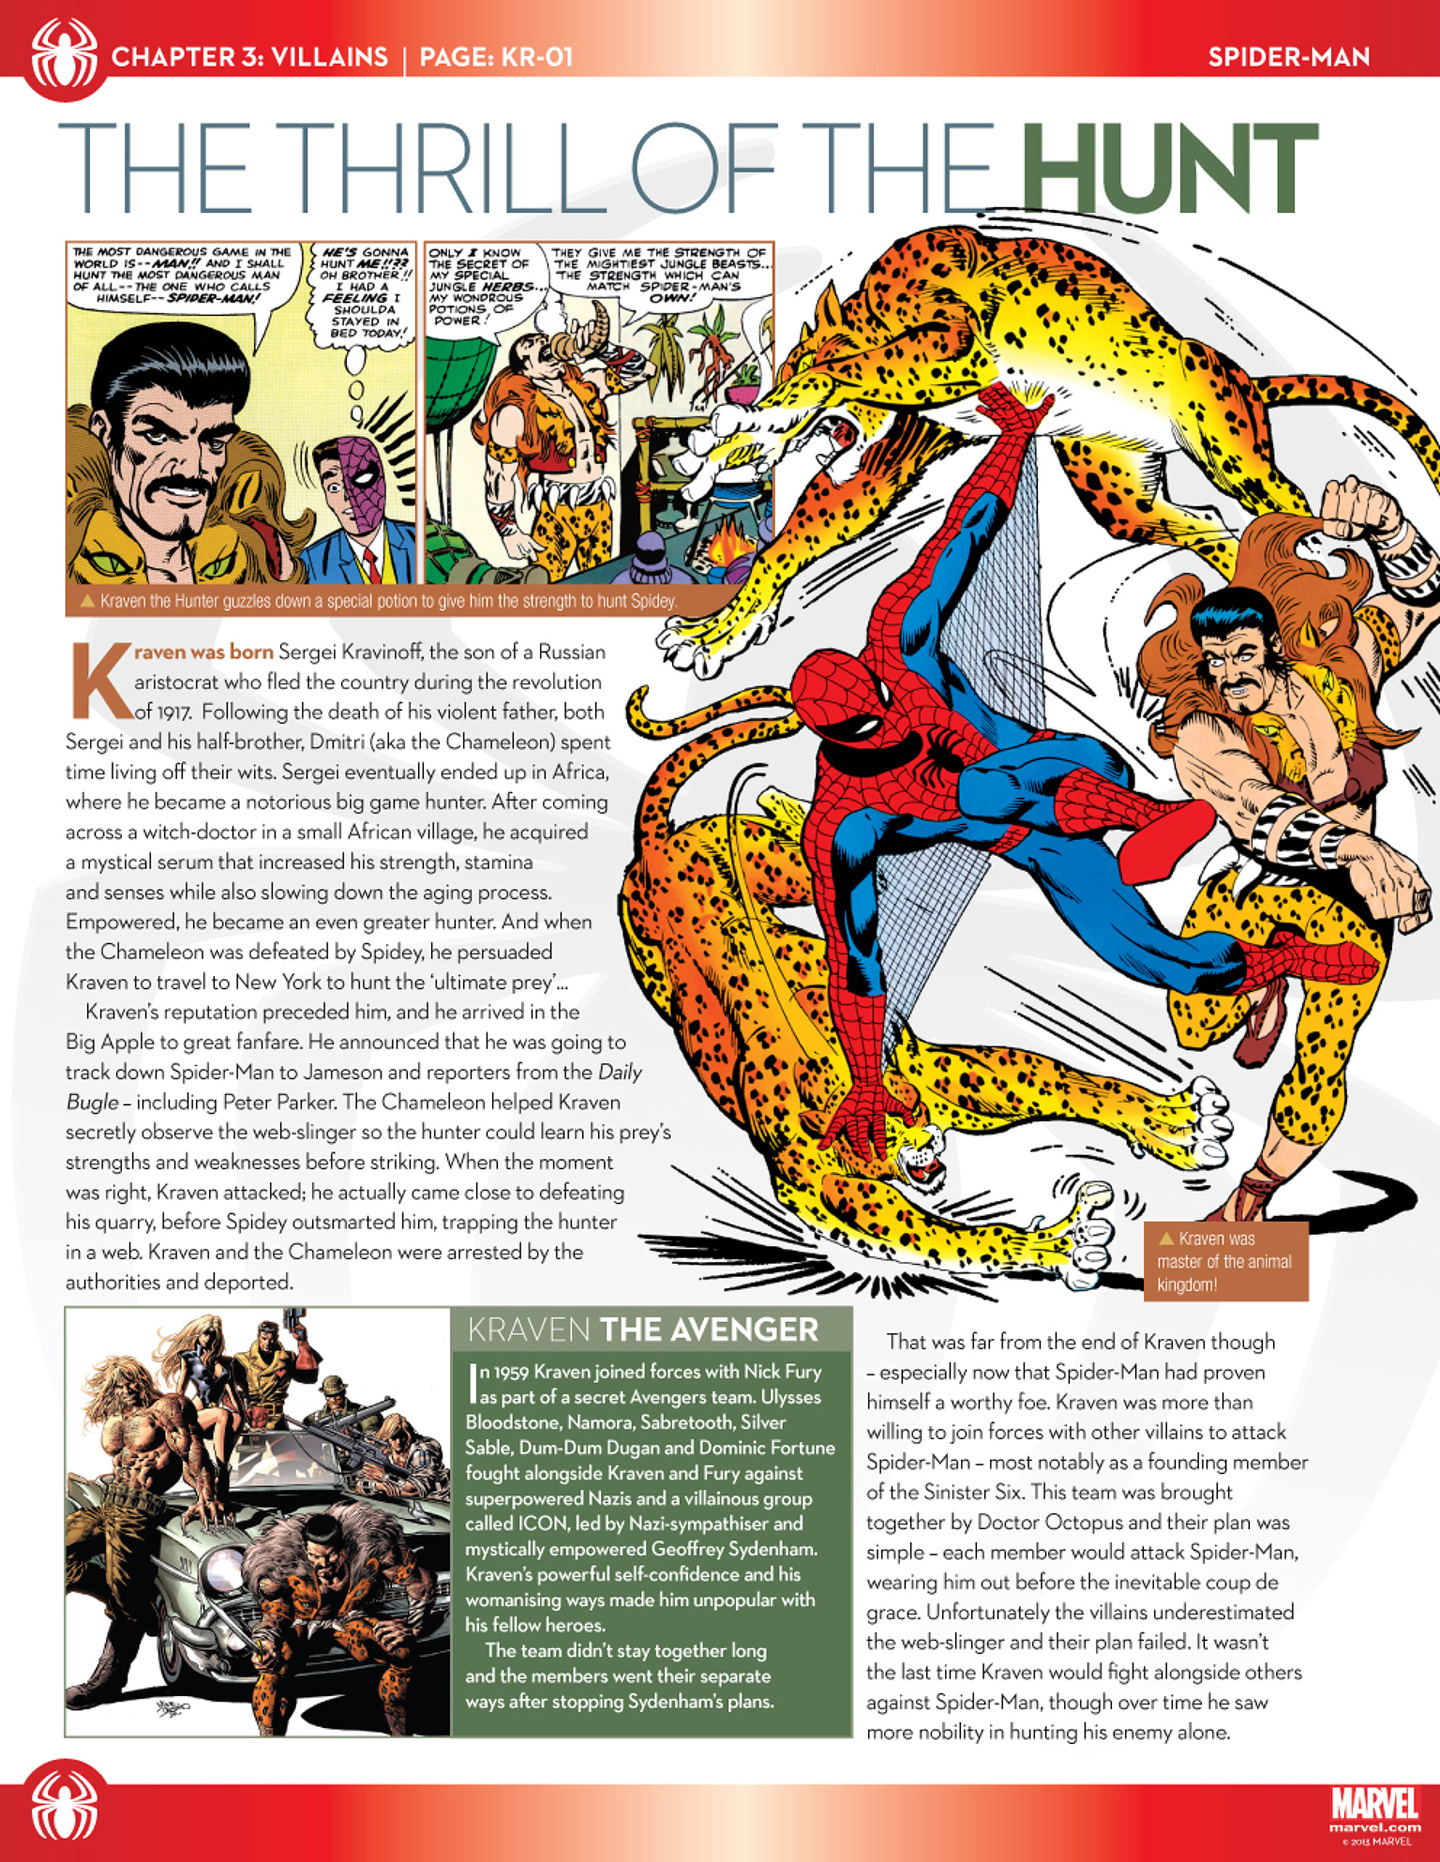 Read online Marvel Fact Files comic -  Issue #38 - 27